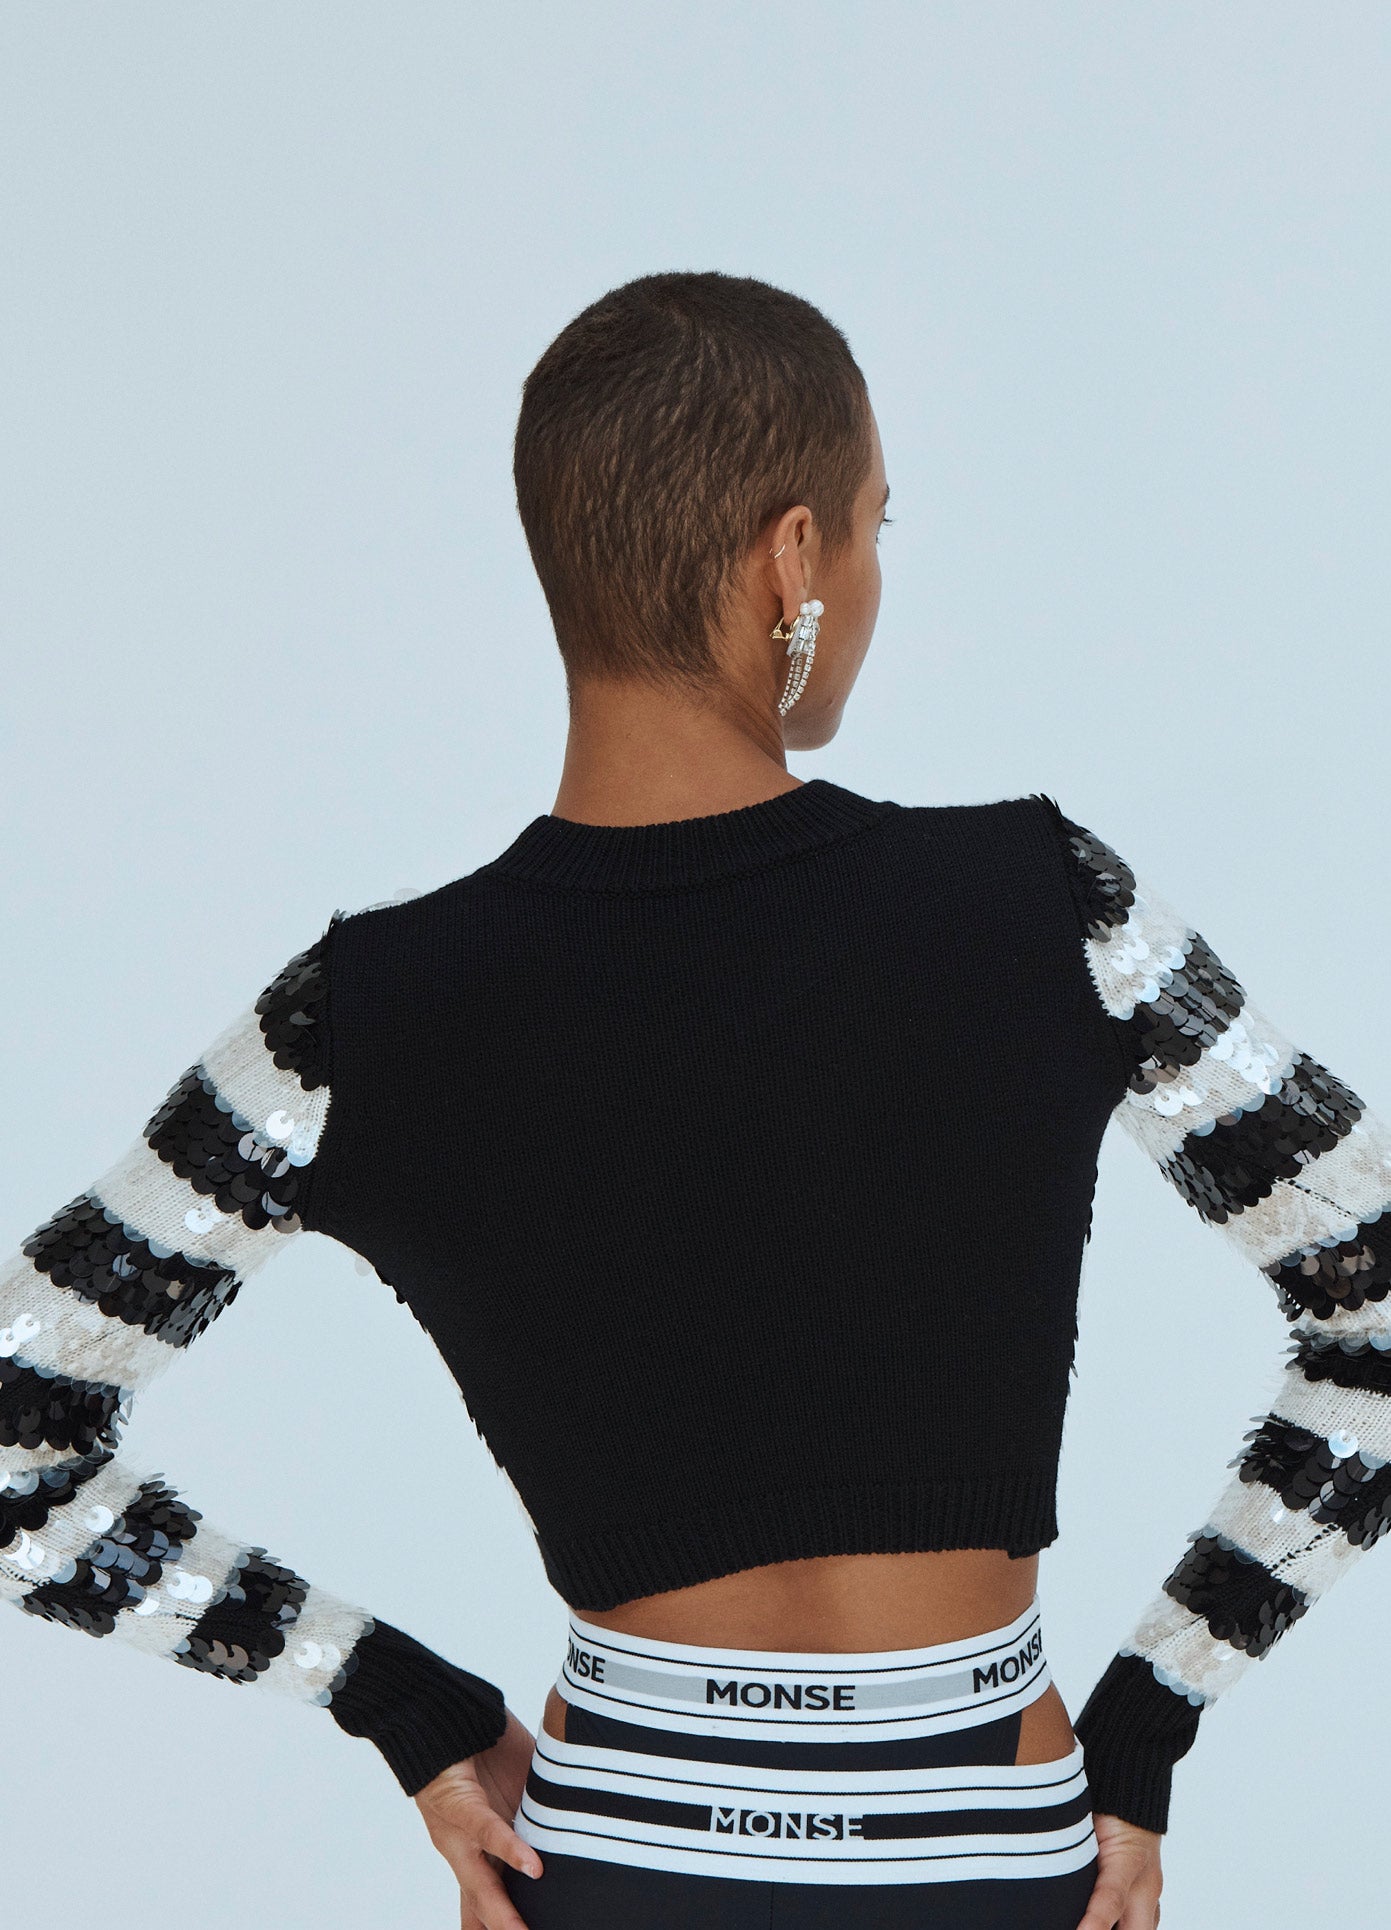 MONSE Sequin Striped Cropped Sweater in Black and Ivory on Model Back View